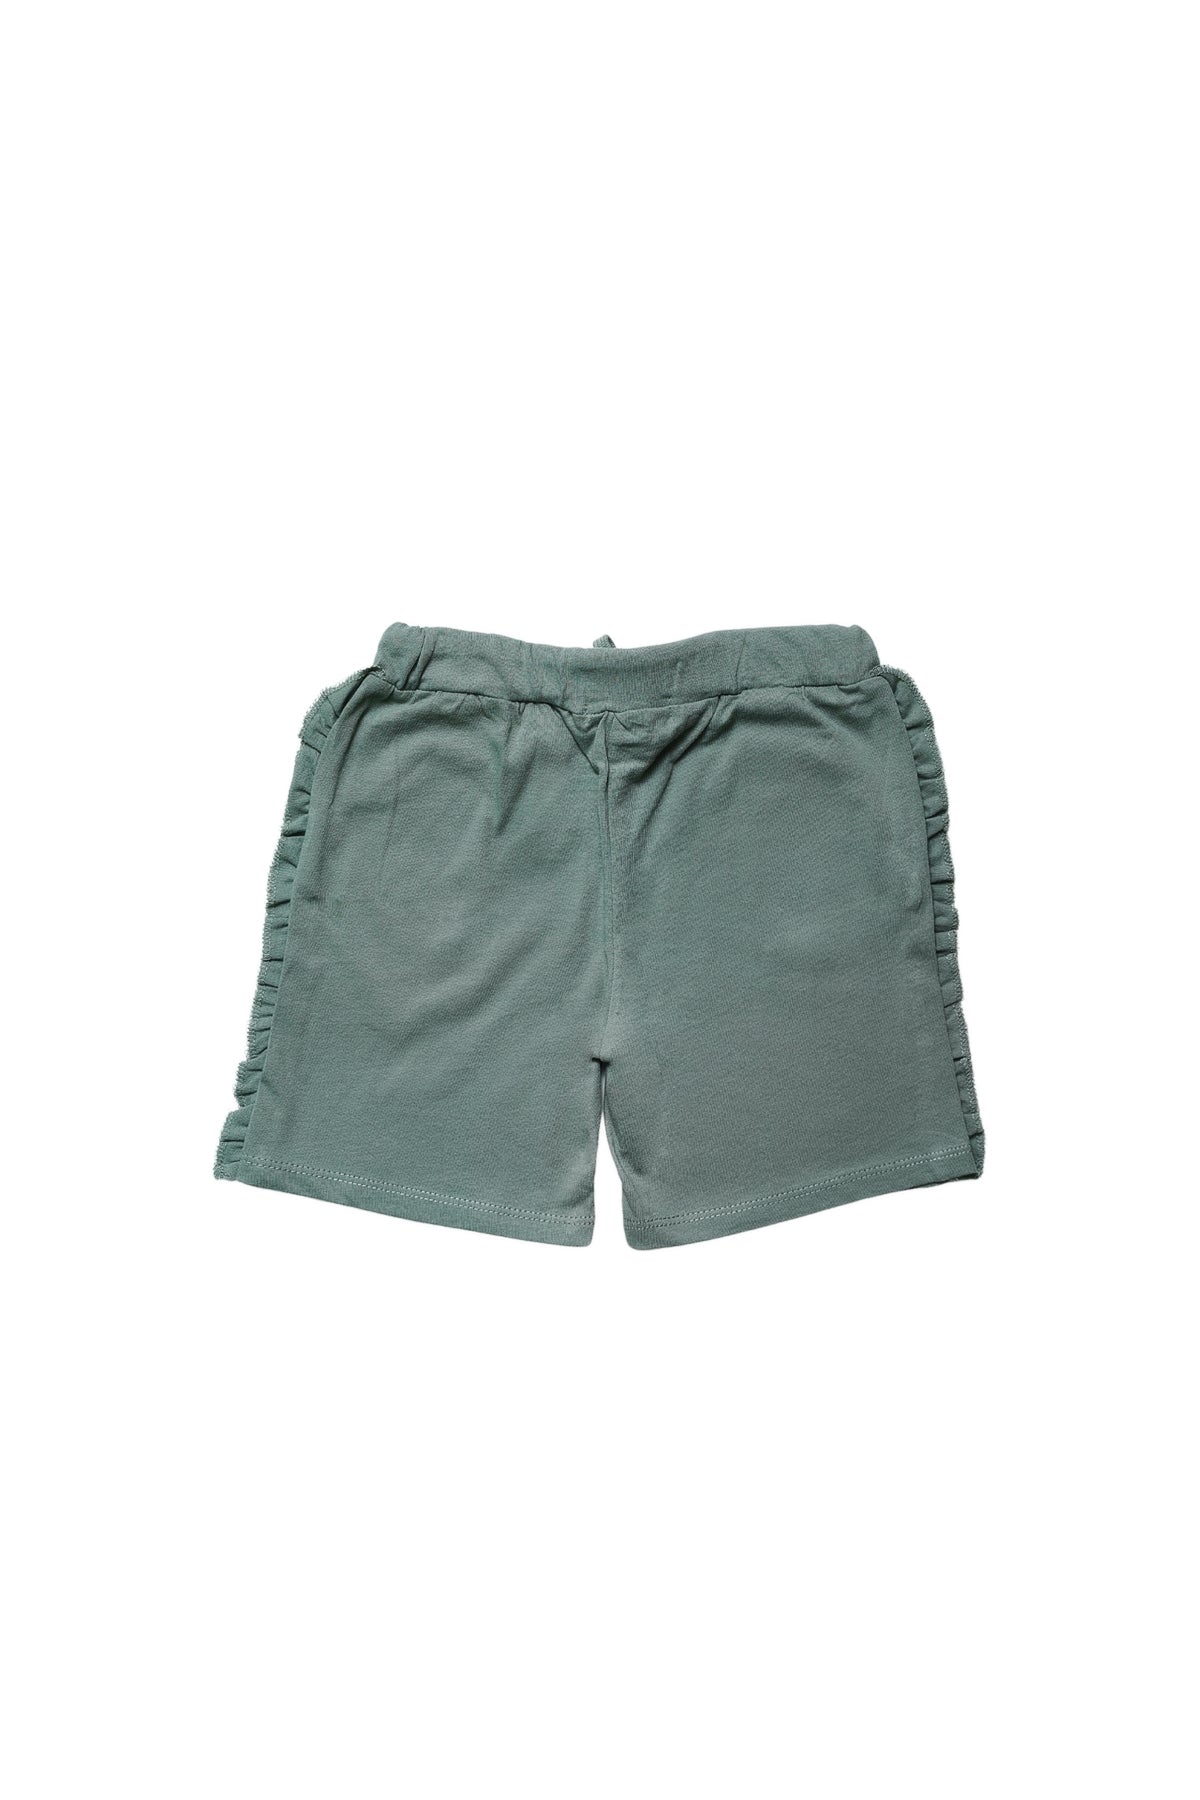 Shorts (Pack Of 2) (GKS-049)